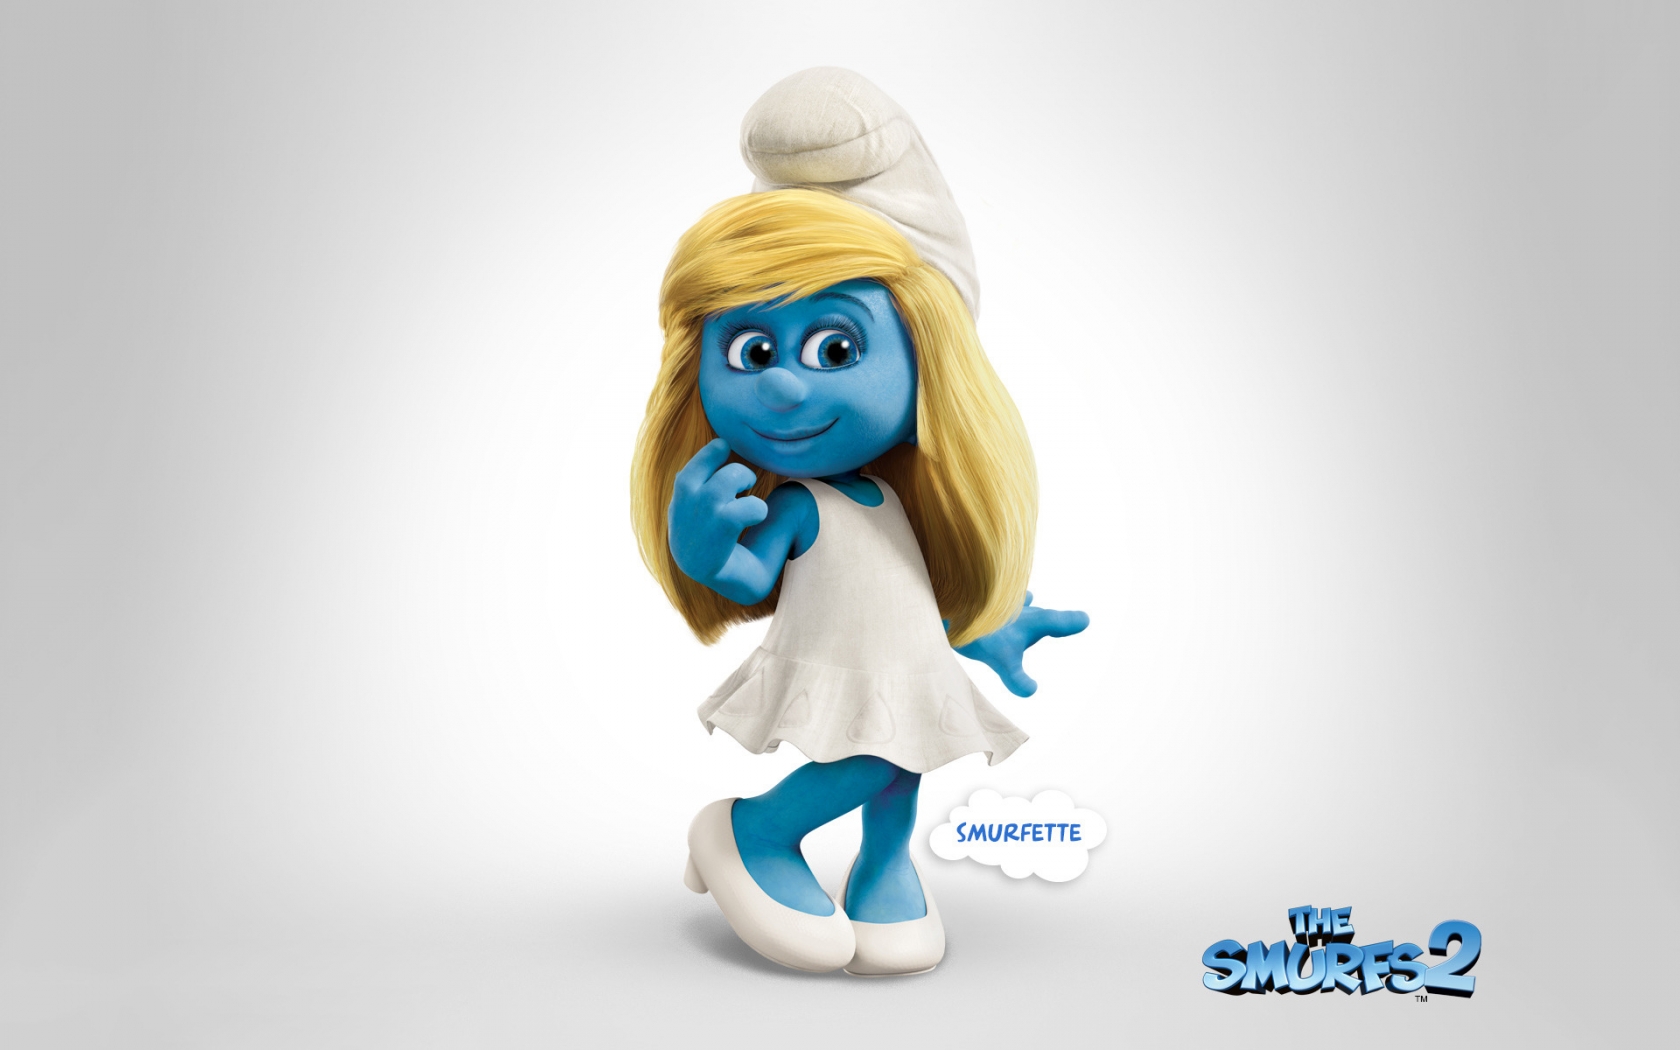 Smurfette The Smurfs 2 for 1680 x 1050 widescreen resolution